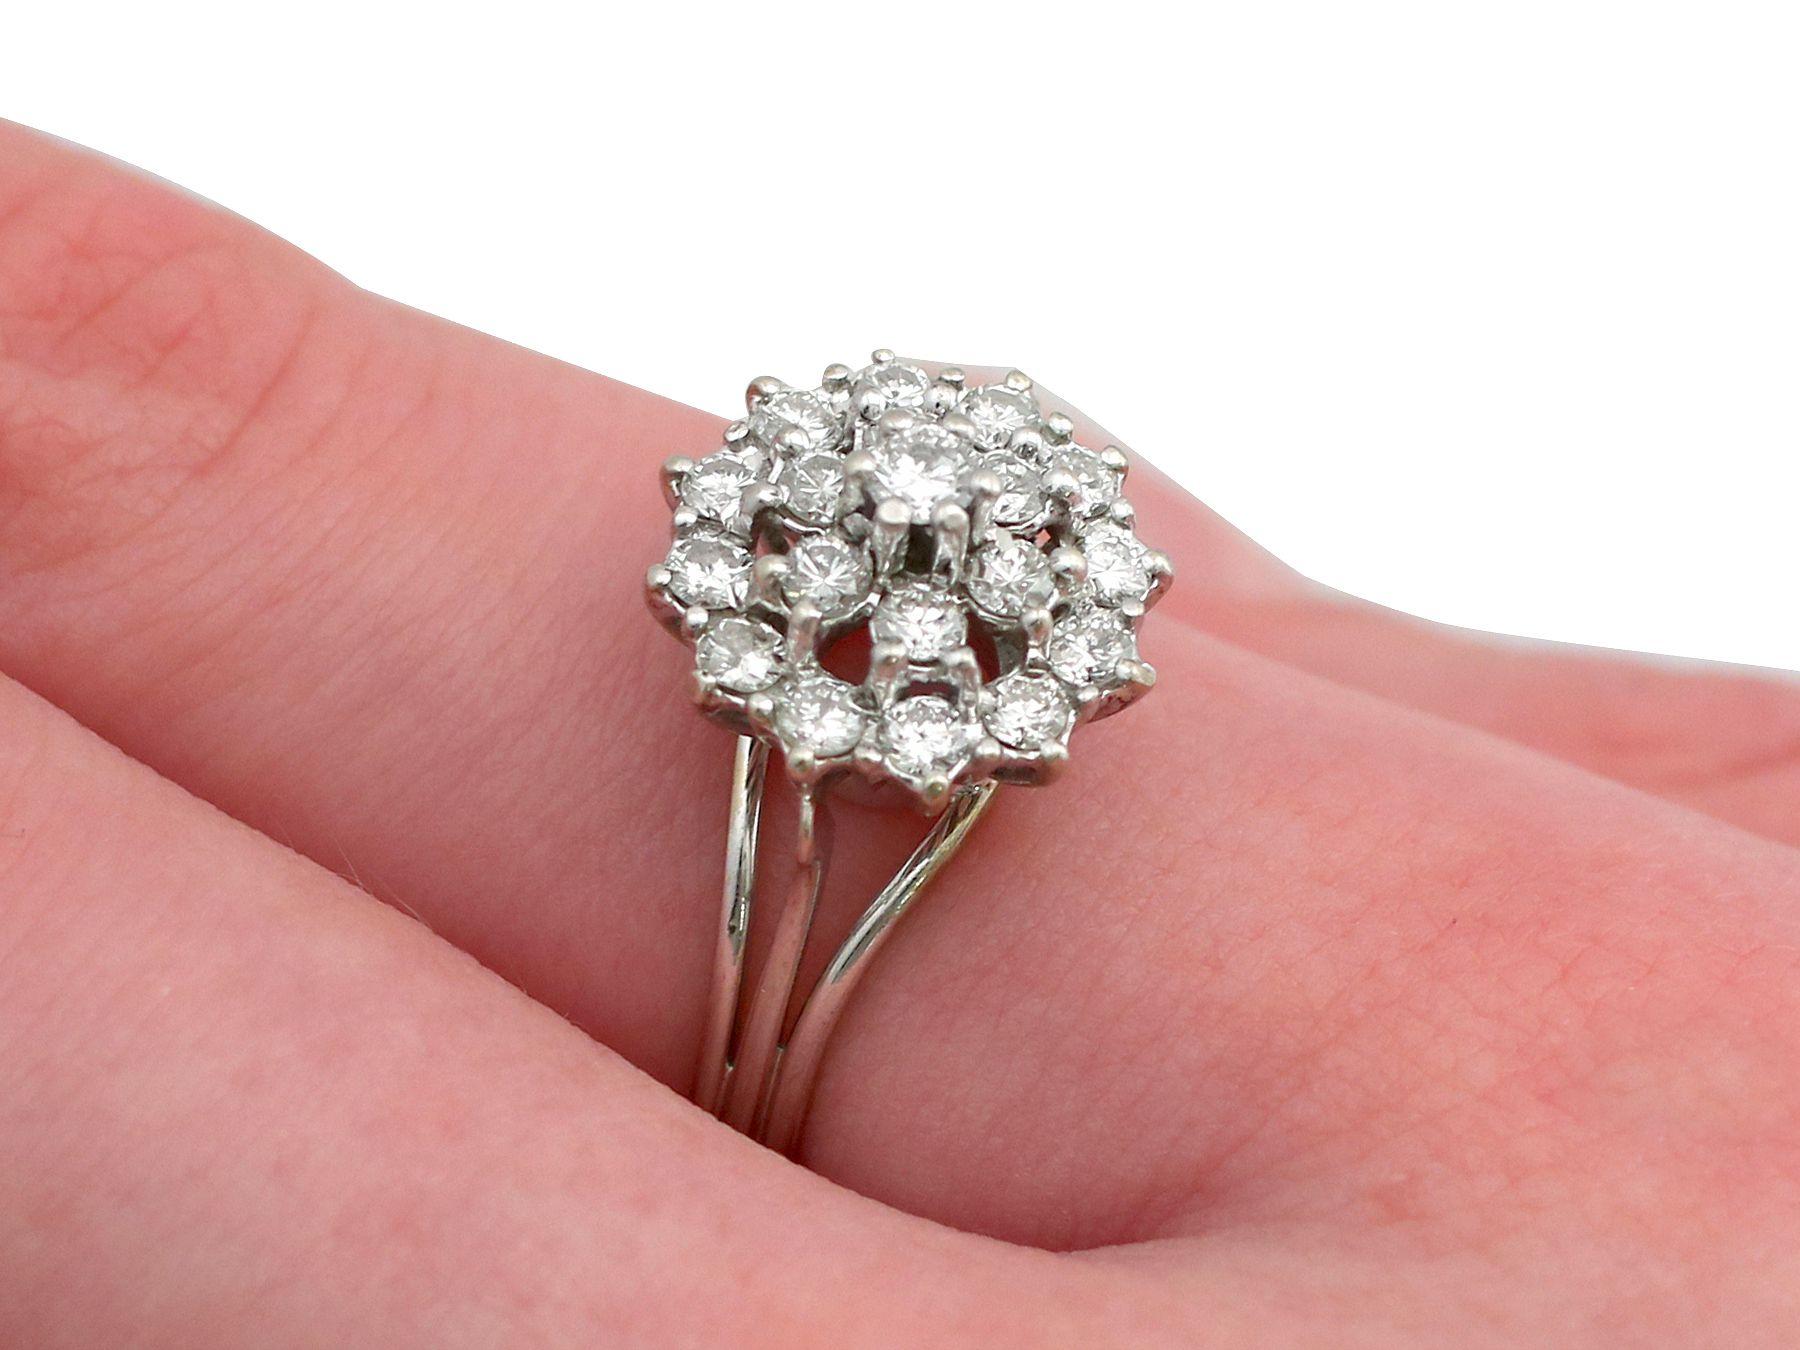 Vintage 1960s Diamond and White Gold Cluster Ring In Excellent Condition For Sale In Jesmond, Newcastle Upon Tyne